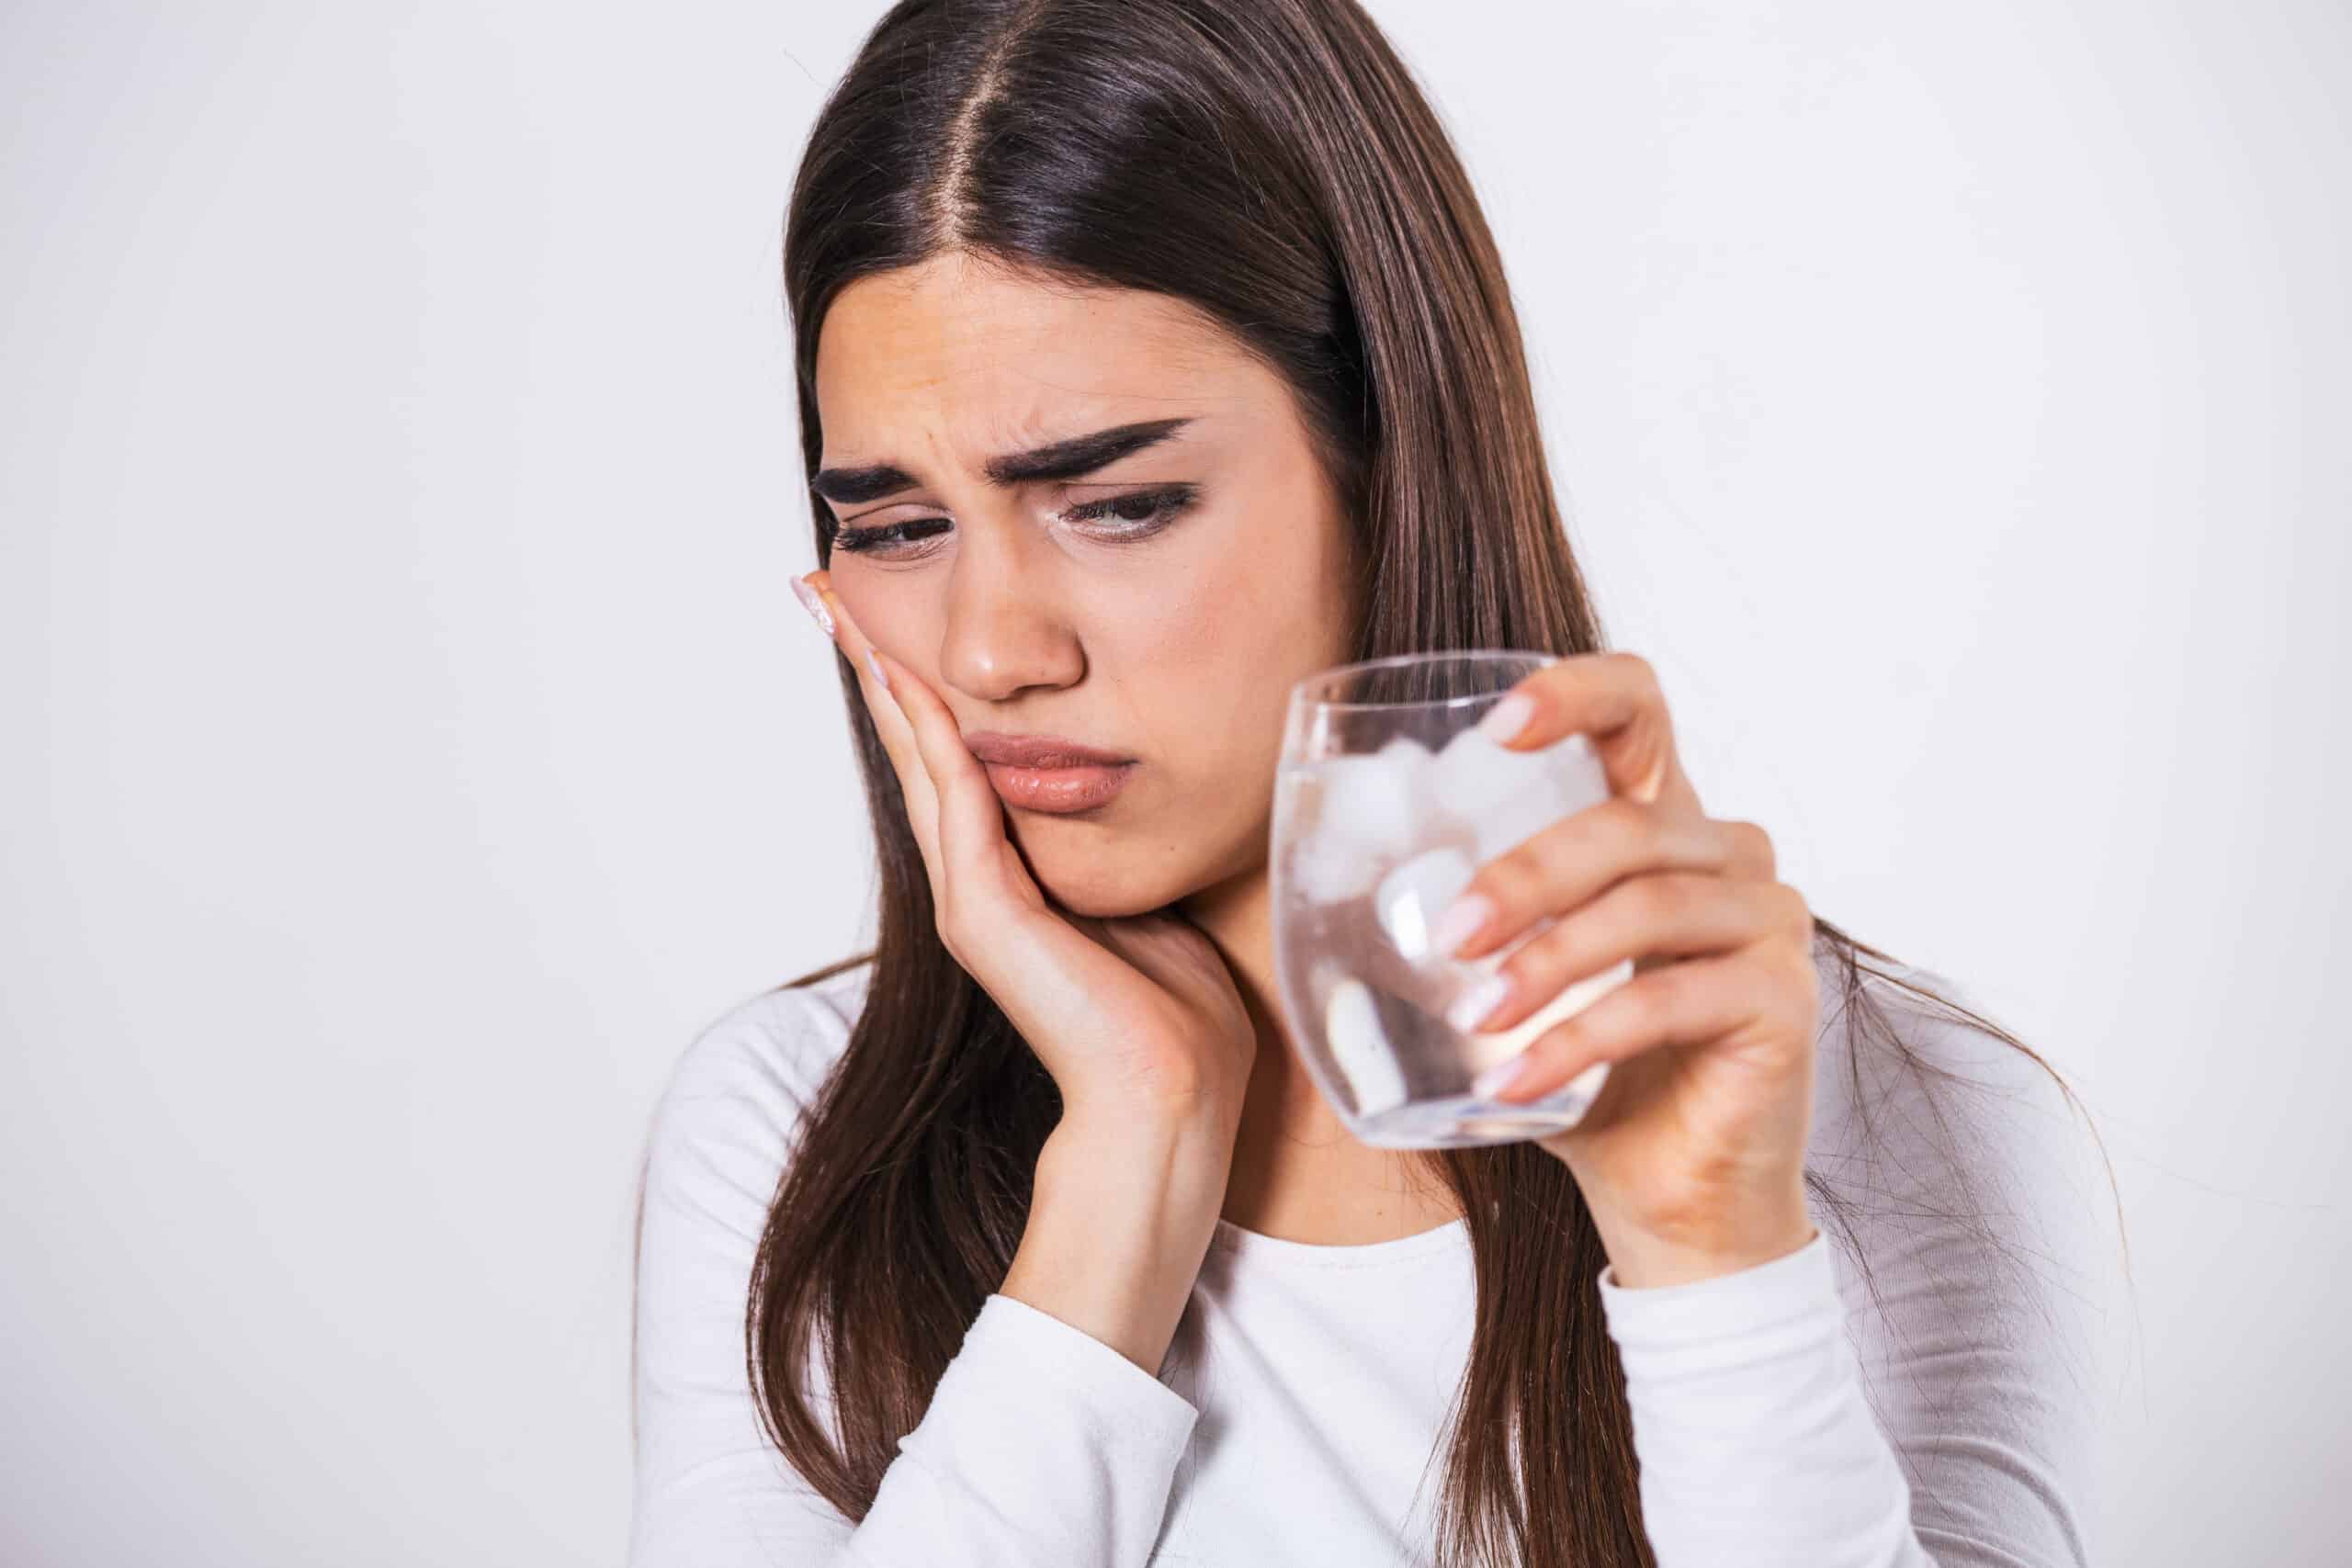 Young woman with sensitive teeth and hand holding glass of cold water with ice